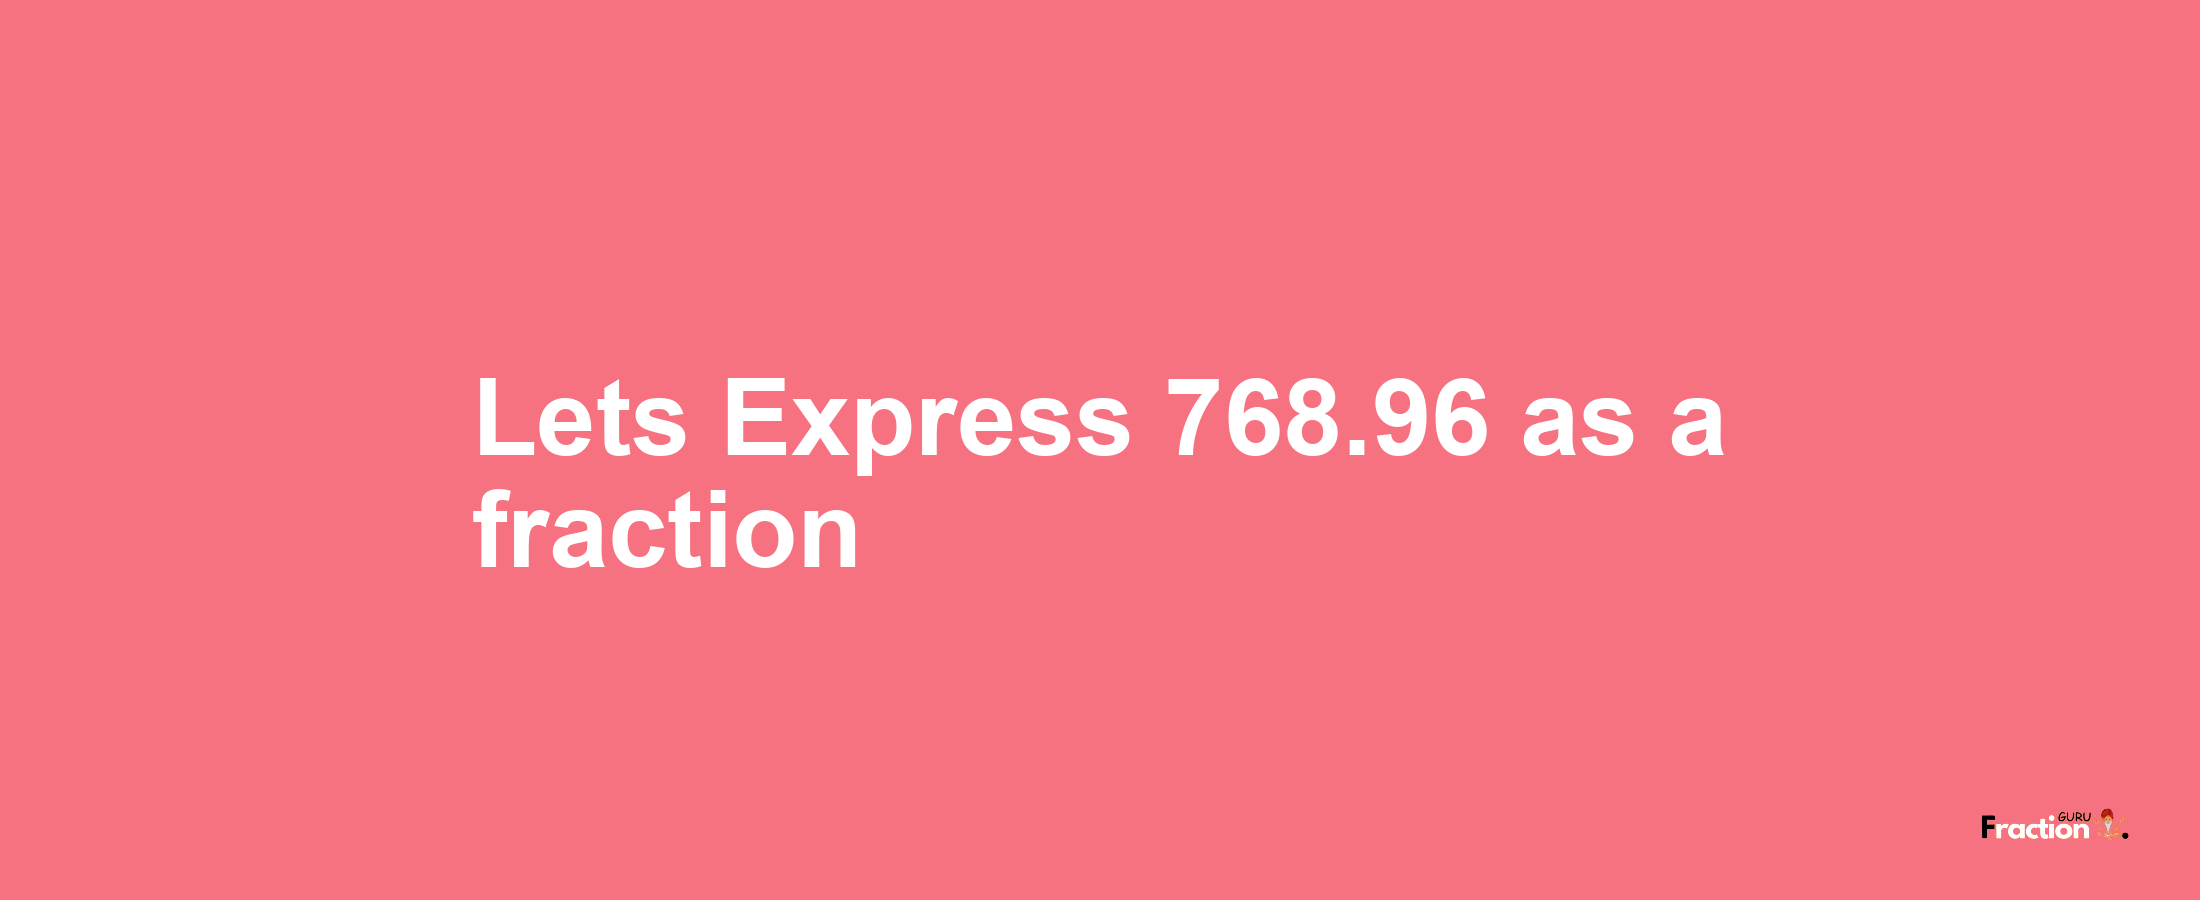 Lets Express 768.96 as afraction